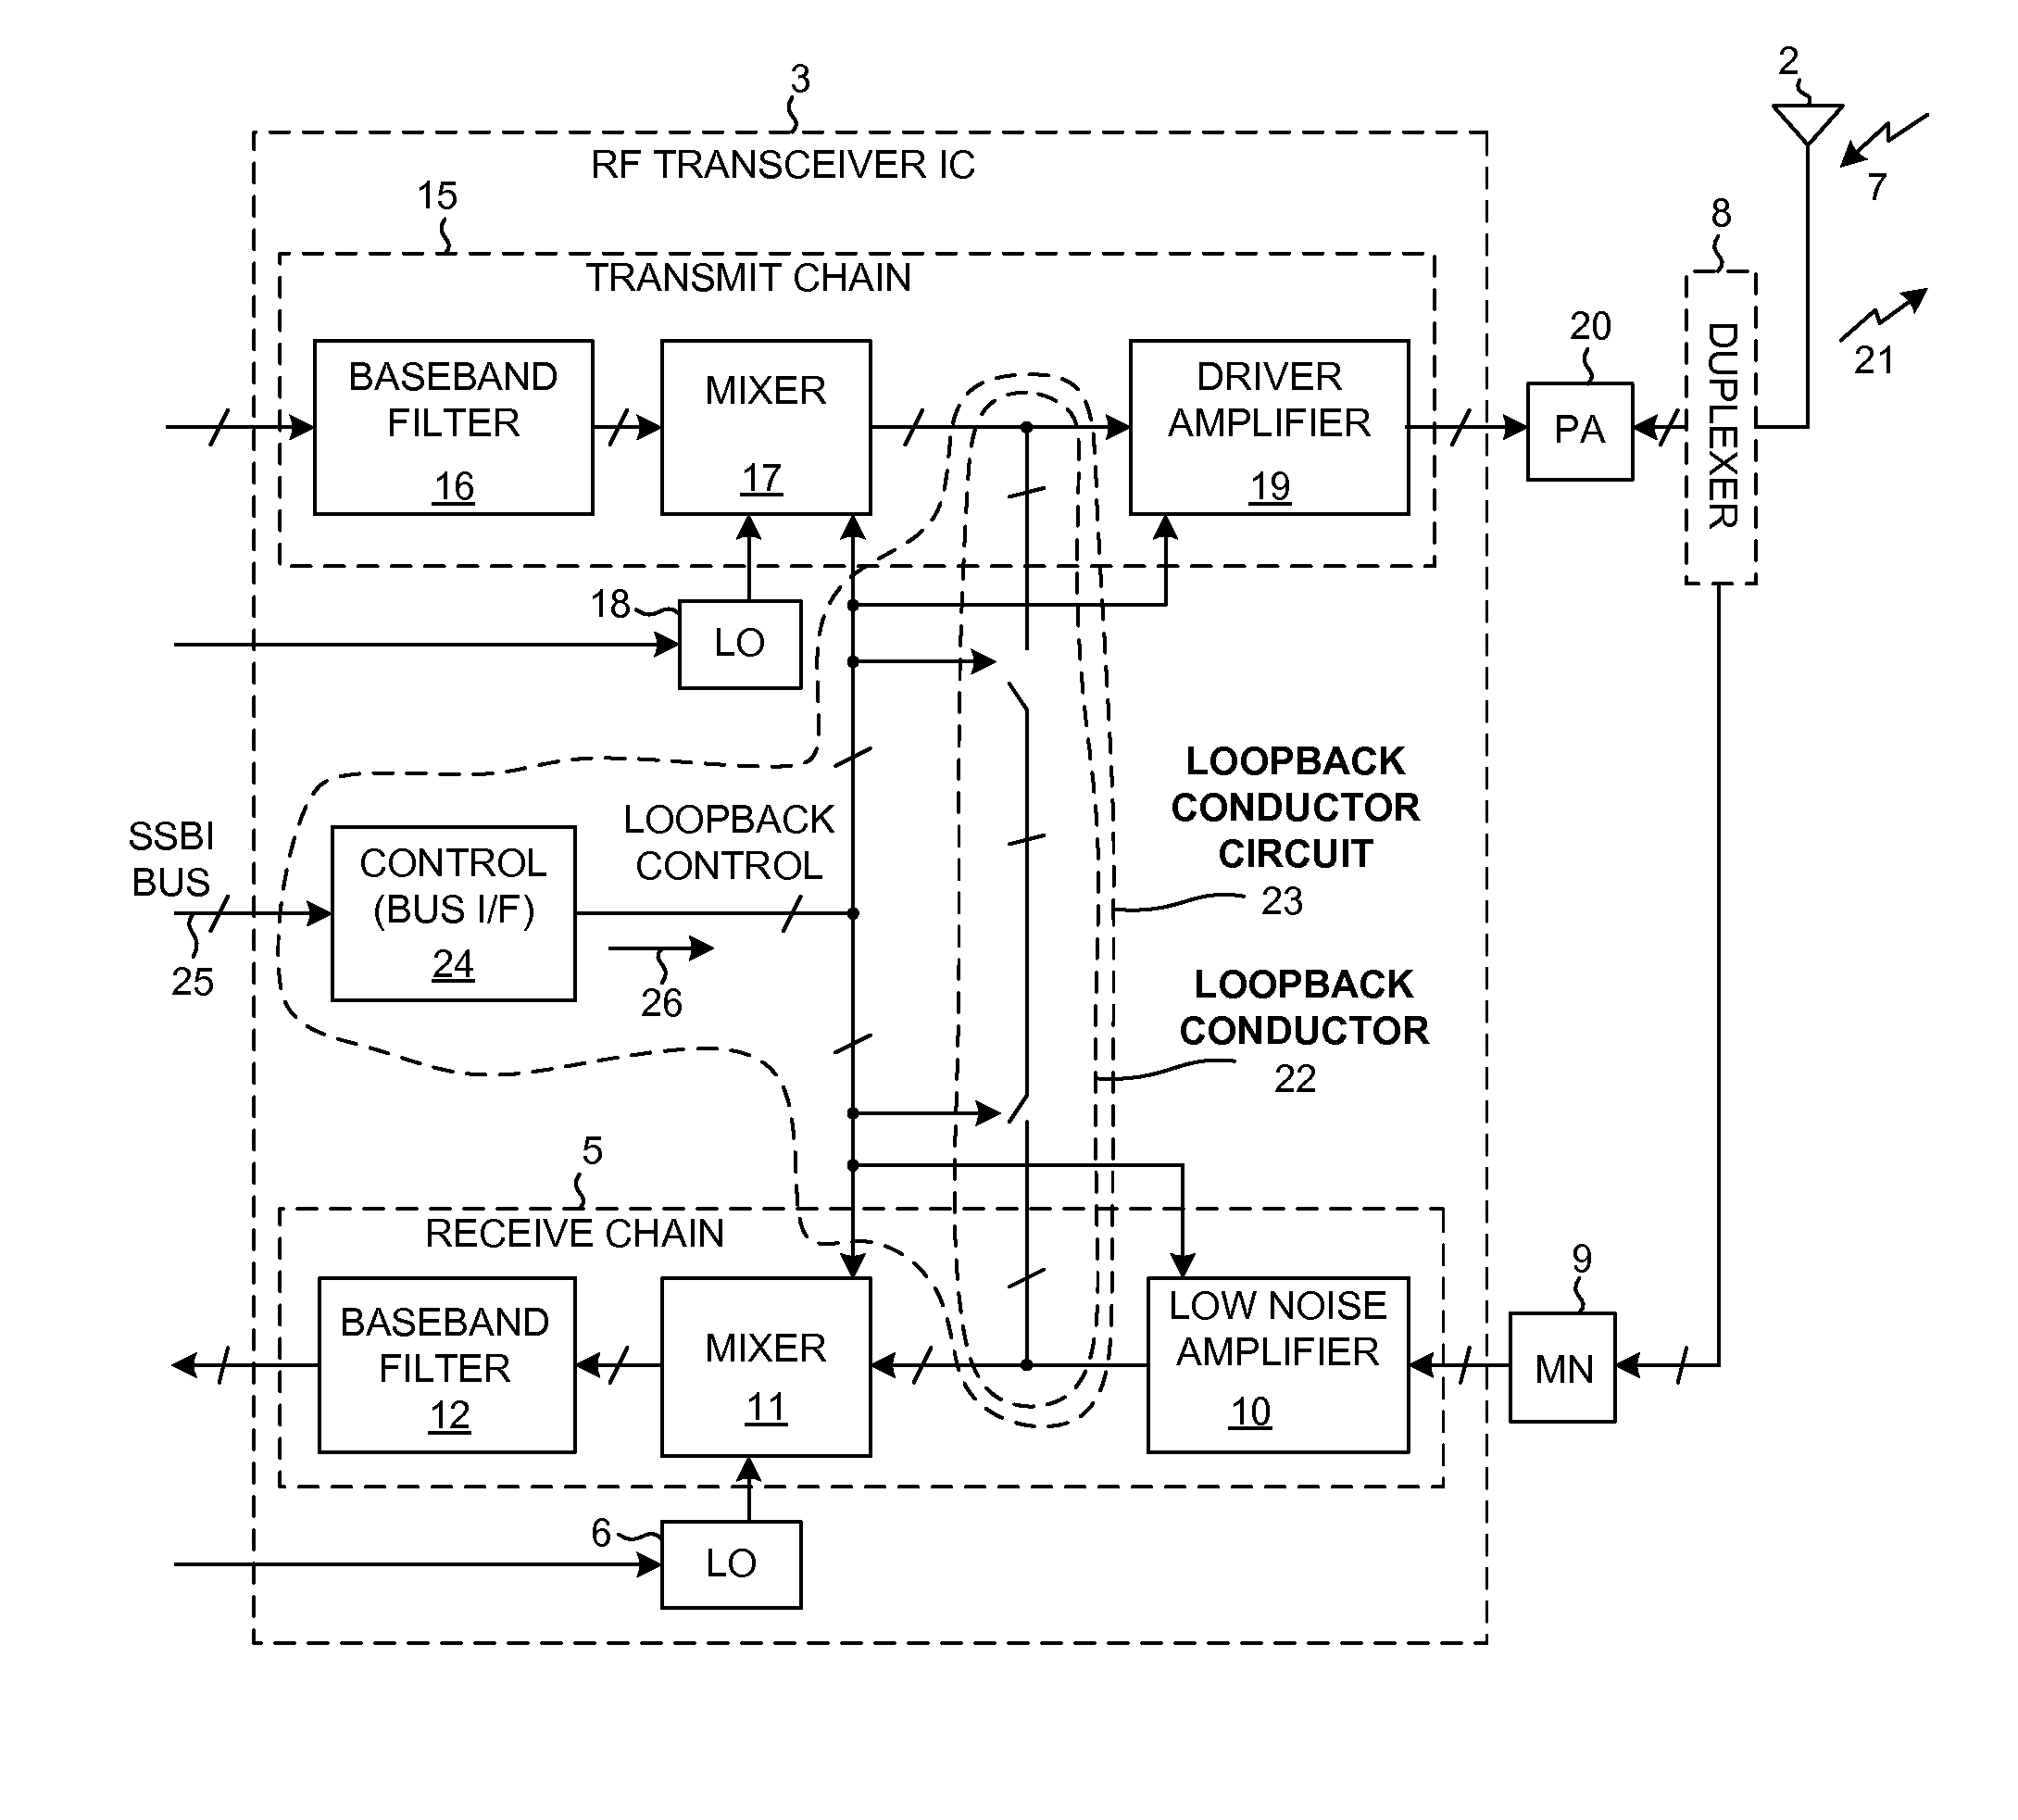 RF transceiver IC having internal loopback conductor for IP2 self test